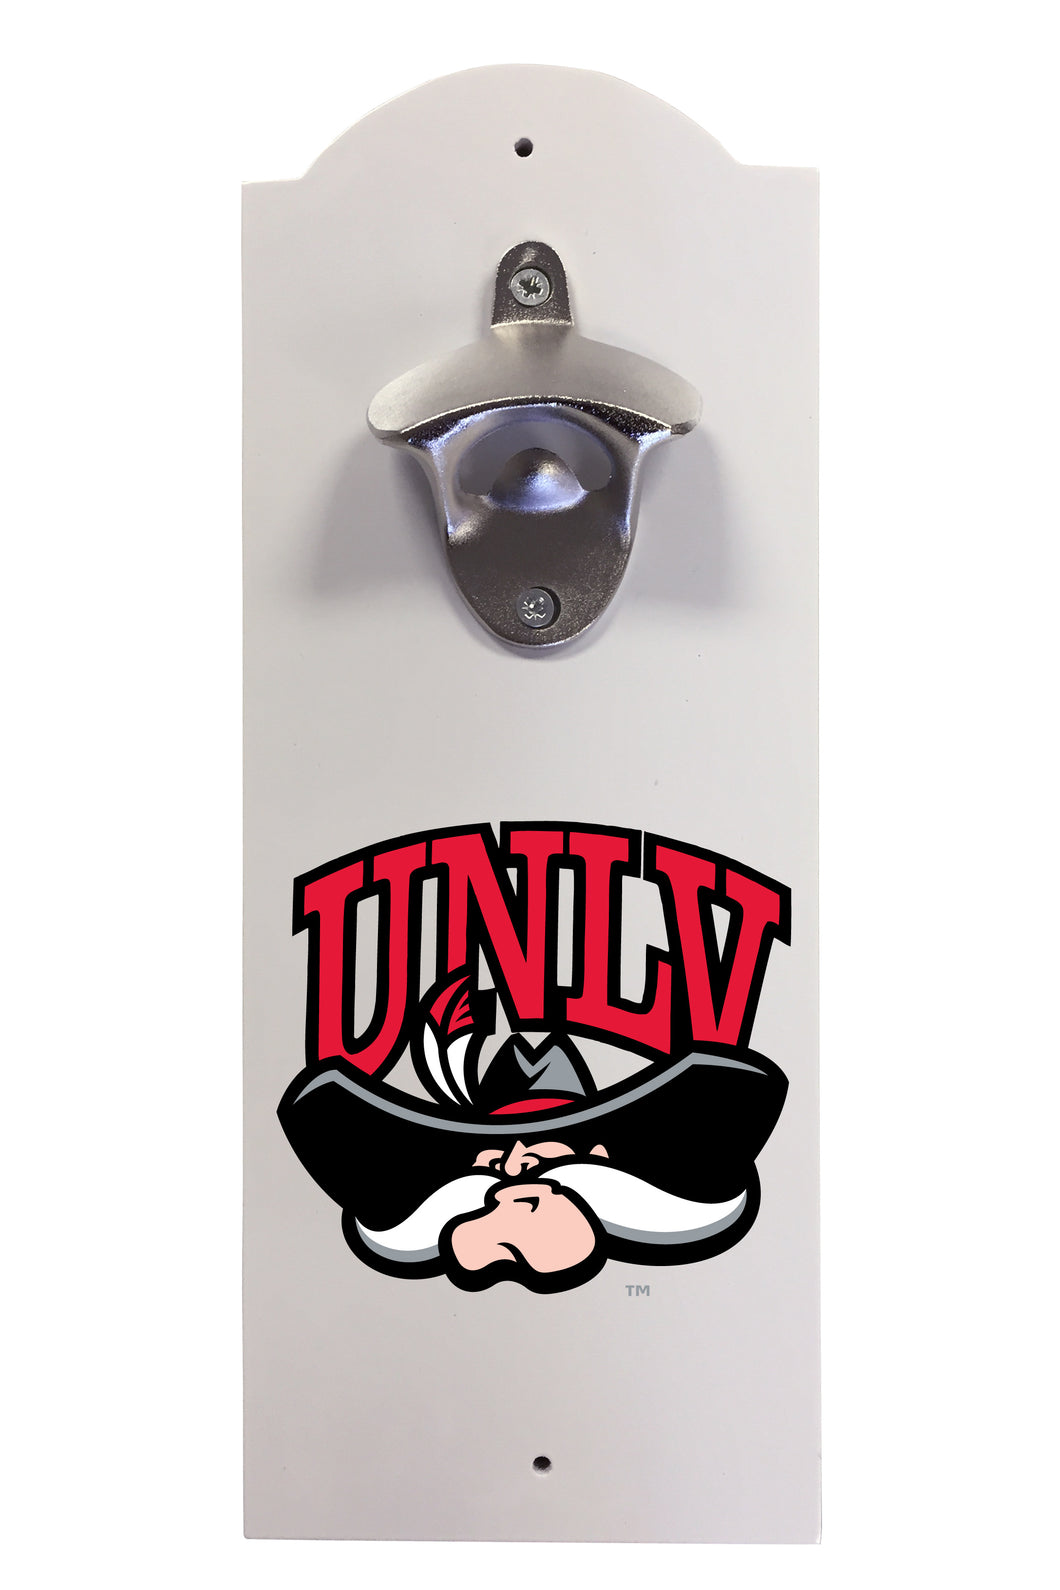 UNLV Rebels Wall-Mounted Bottle Opener – Sturdy Metal with Decorative Wood Base for Home Bars, Rec Rooms & Fan Caves